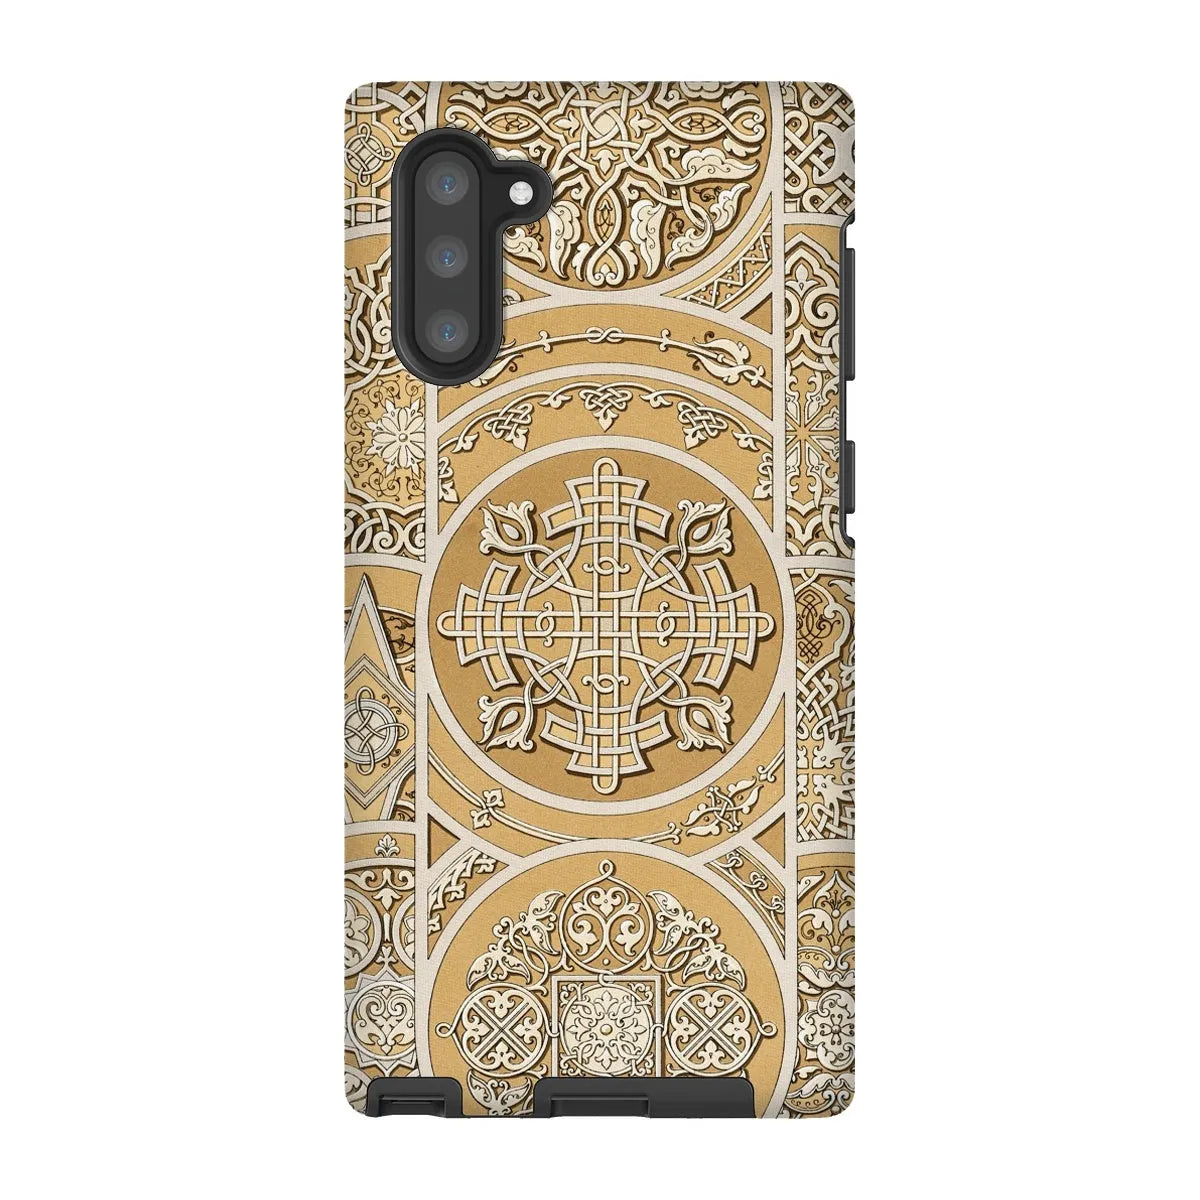 Russian Pattern By Auguste Racinet Tough Phone Case - Samsung Galaxy Note 10 / Matte - Mobile Phone Cases - Aesthetic